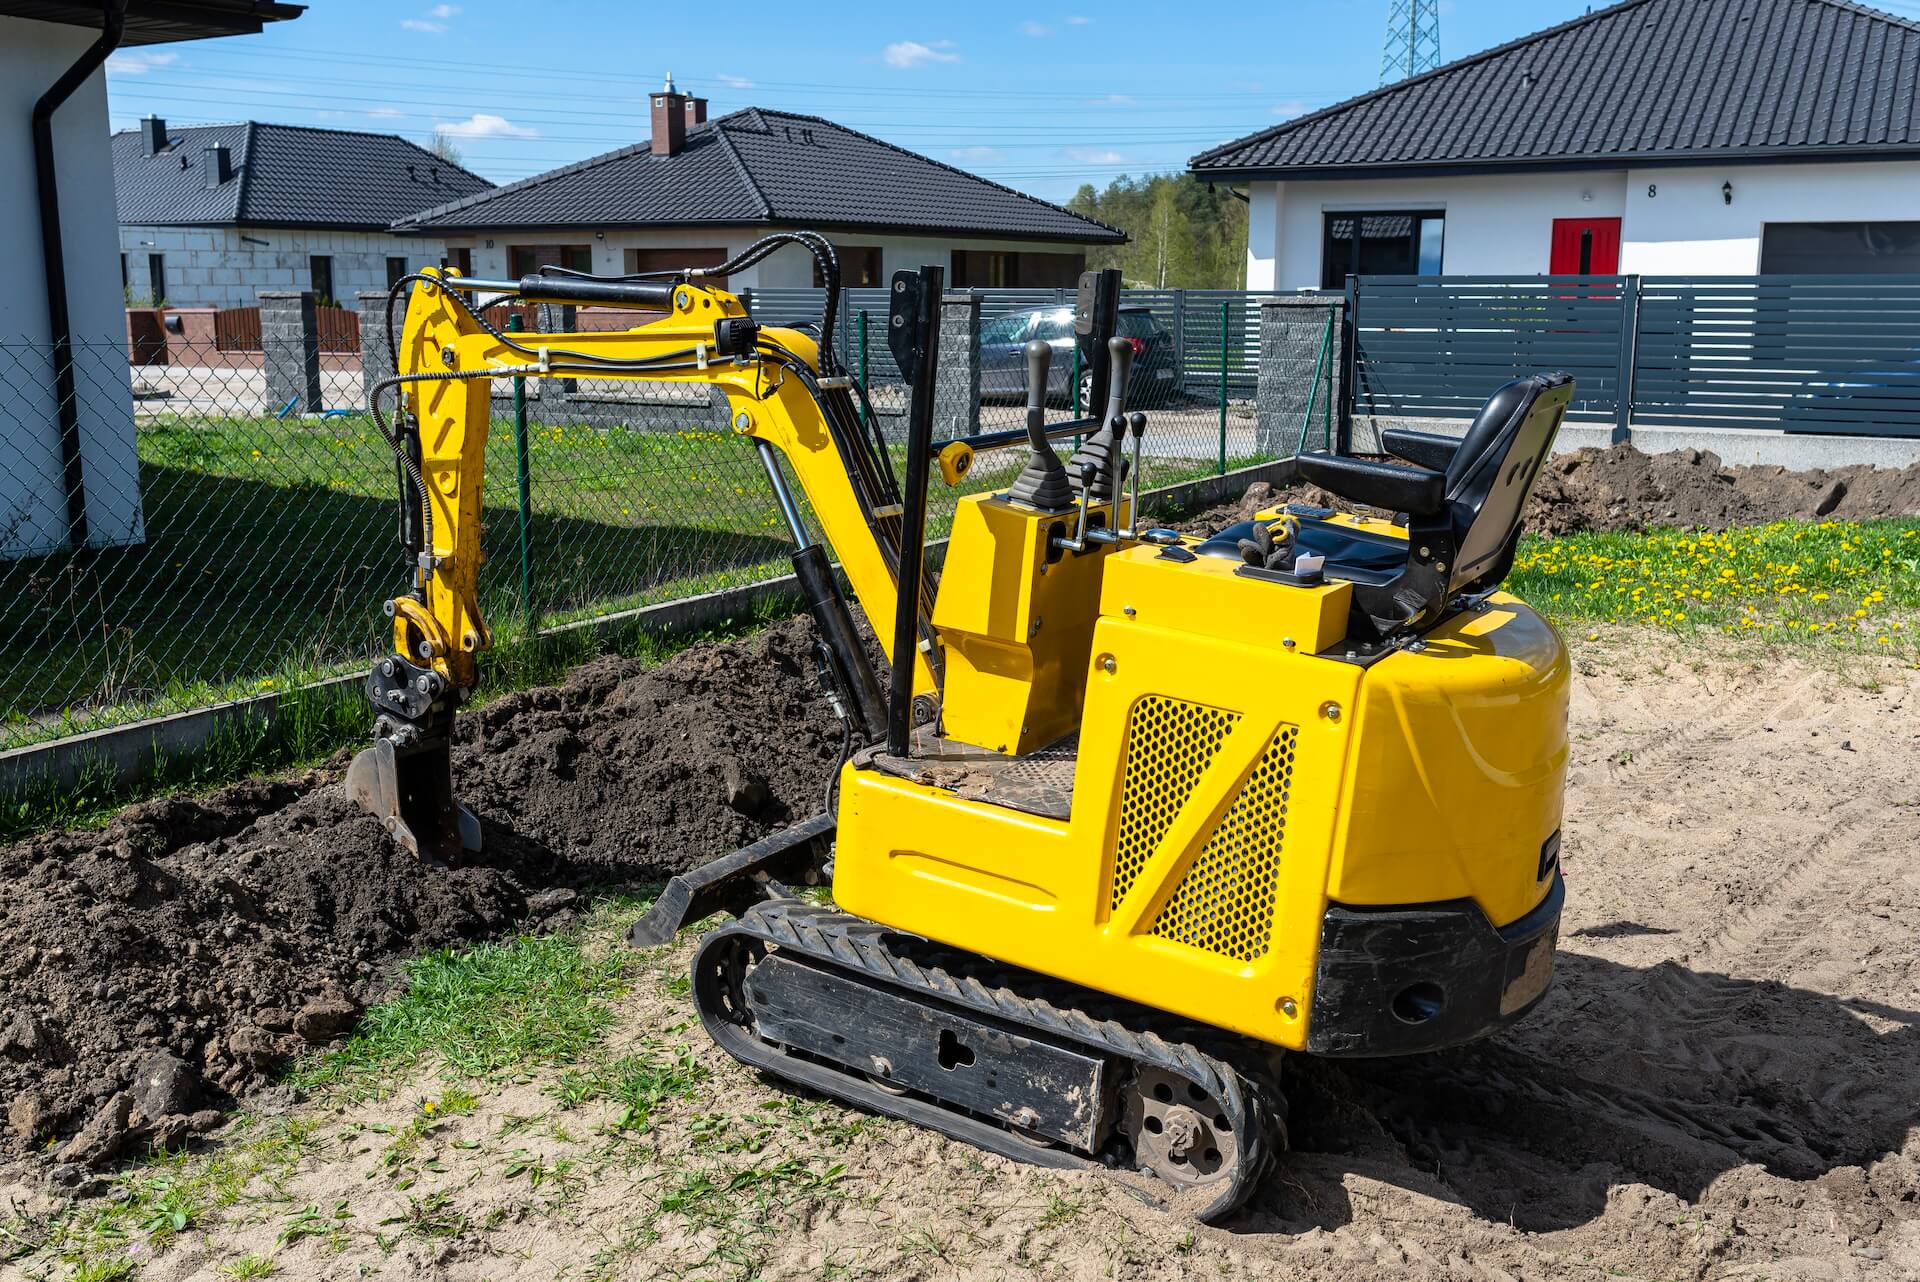 Mini excavator being used in a residential area | Featured image for the What is a Mini Excavator Used For blog on Machinery Direct.